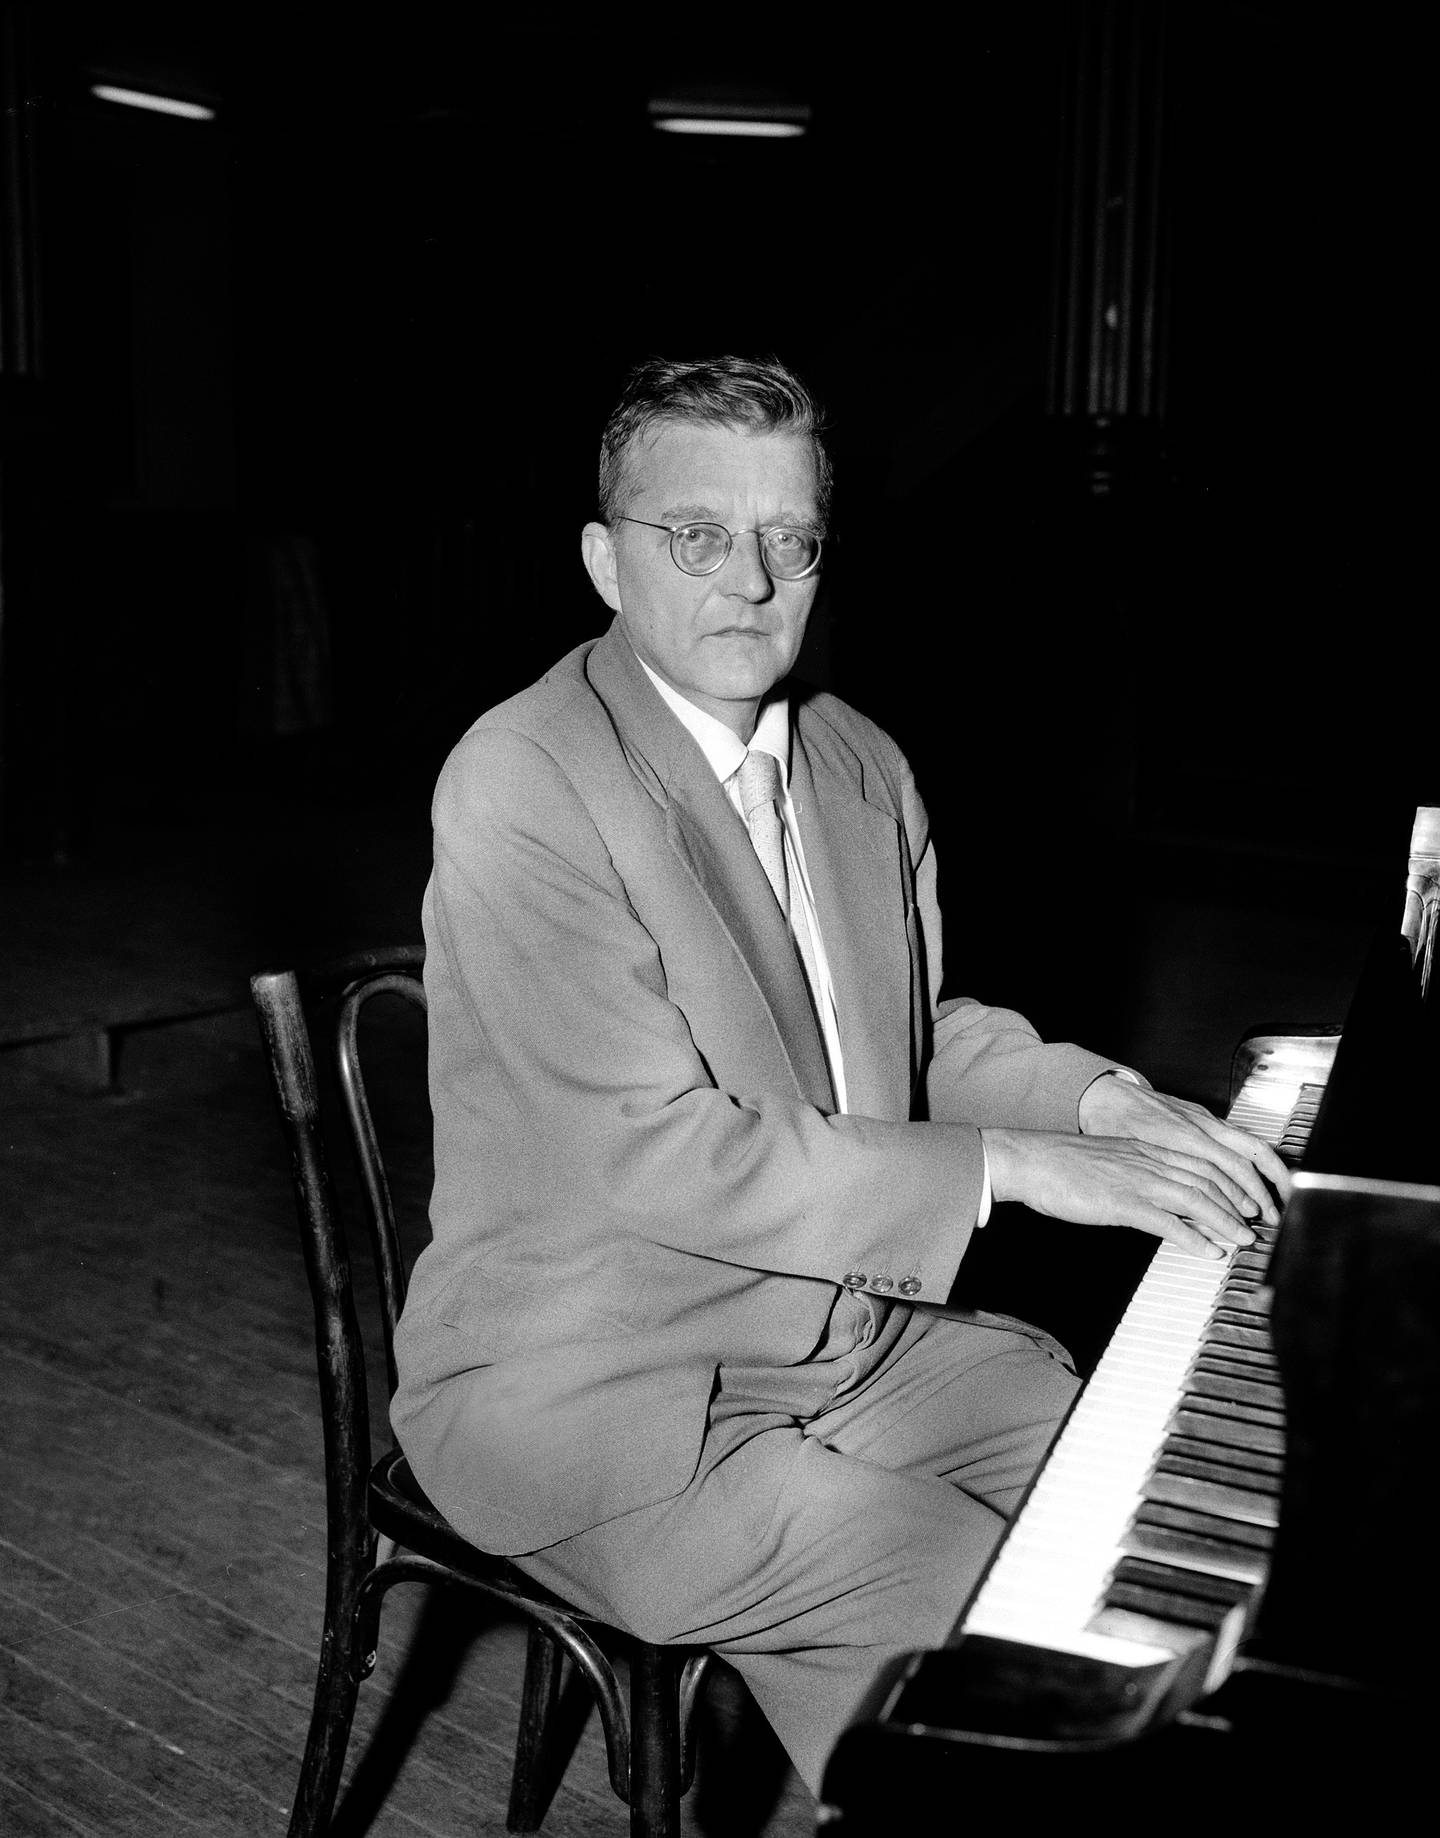 Soviet composer Dmitry Shostakovich poses during a recording session for the French record label Pathe Marconi, Paris, May 23, 1958. Shostakovich is scheduled to perform two of his own piano concertos on May 27-28 at the Palais de Chaillot. (AP Photo)